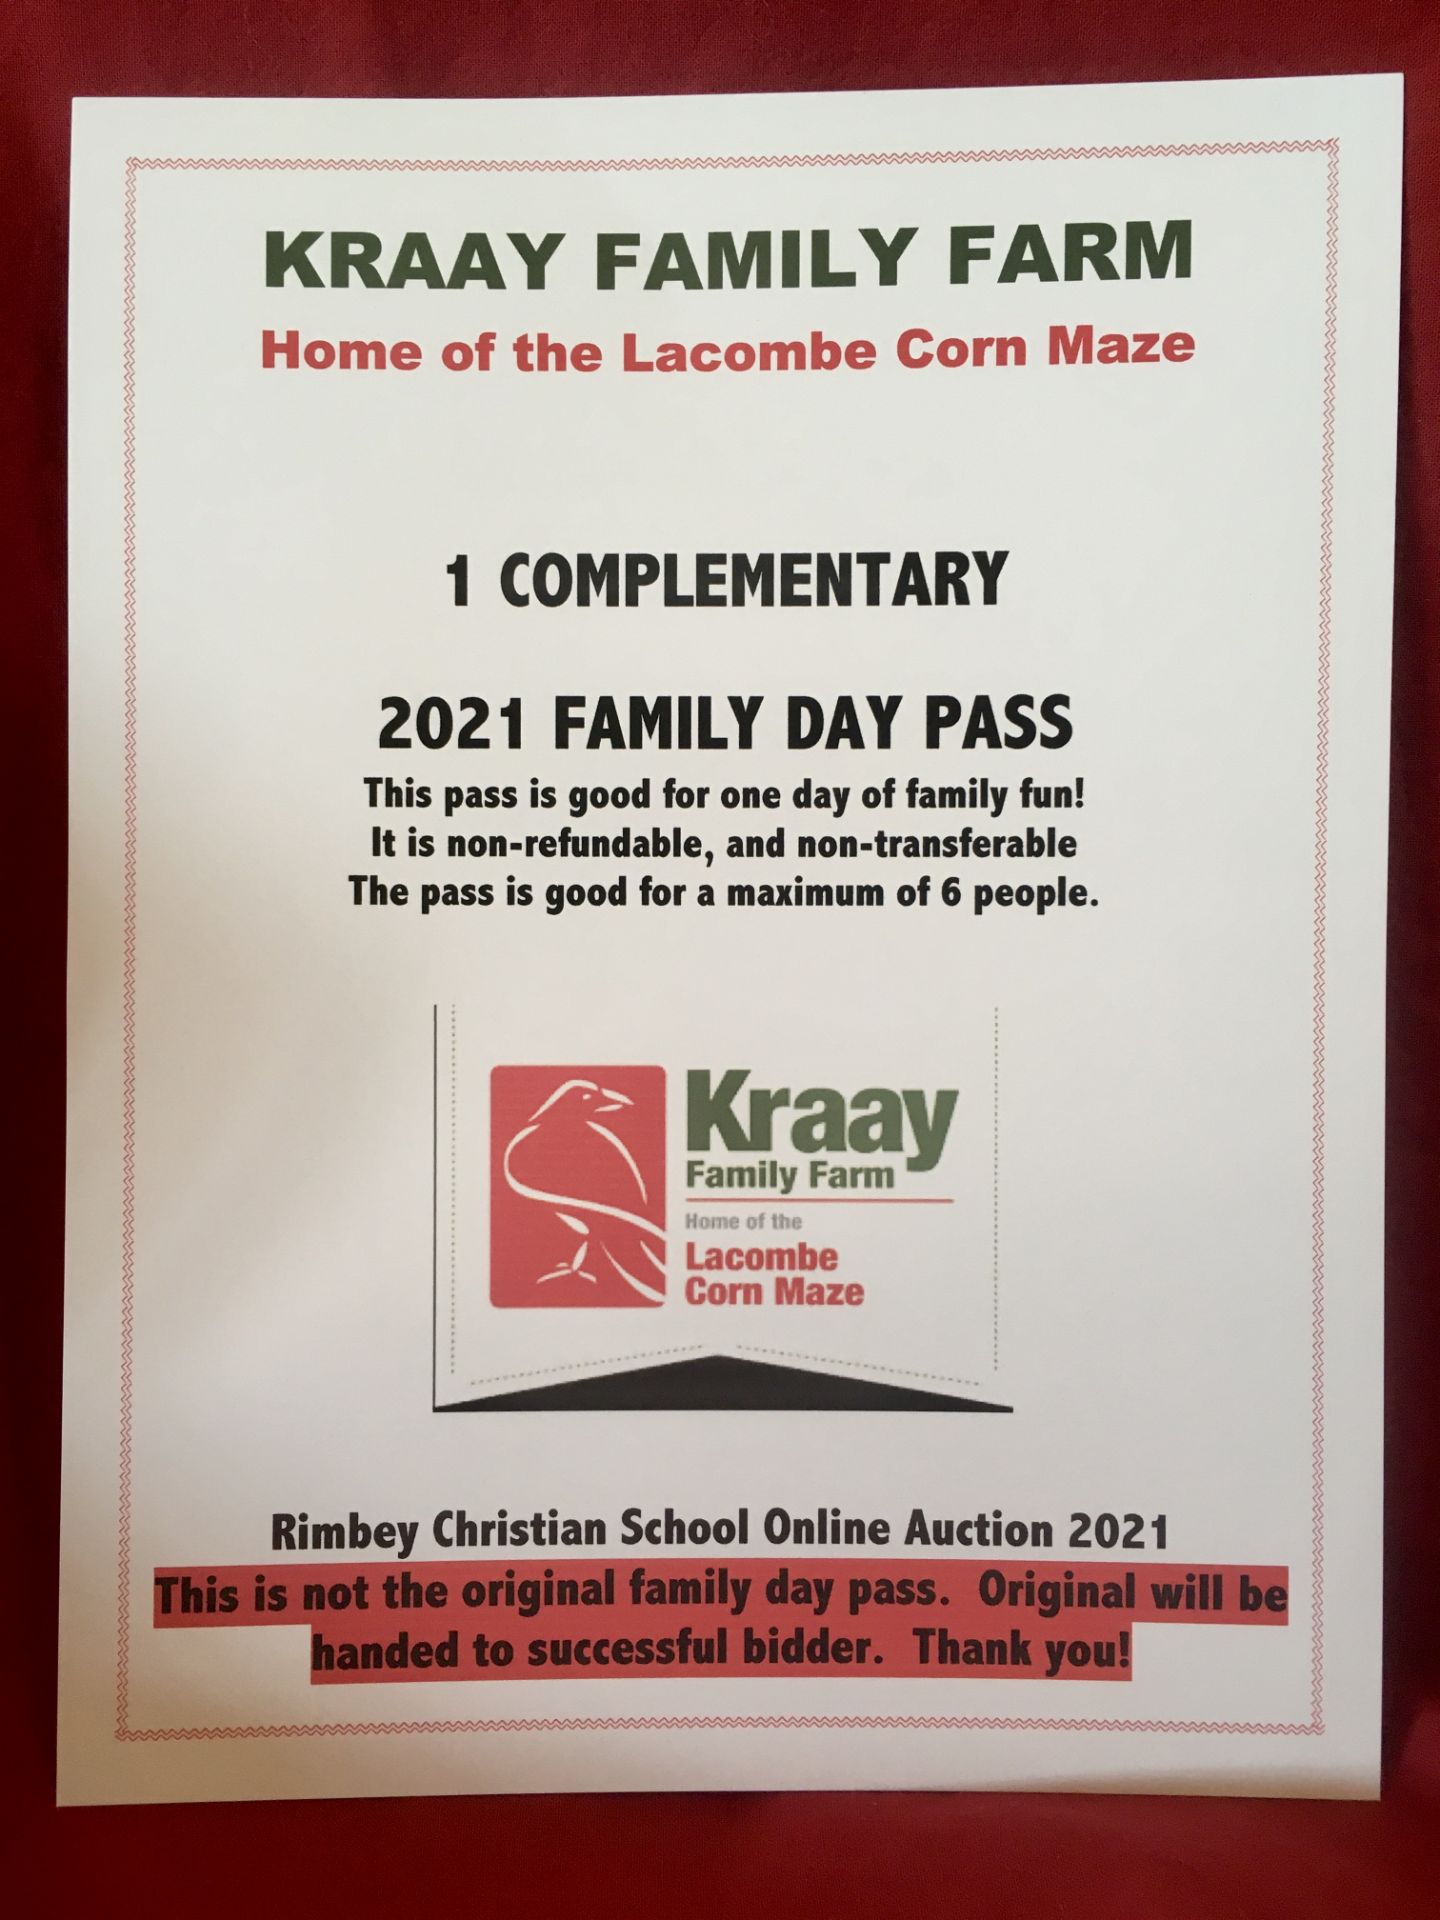 1 - 2021 FAMILY DAY PASS AT KRAAY FAMILY FARM The Family Day Pass is good for one day of family